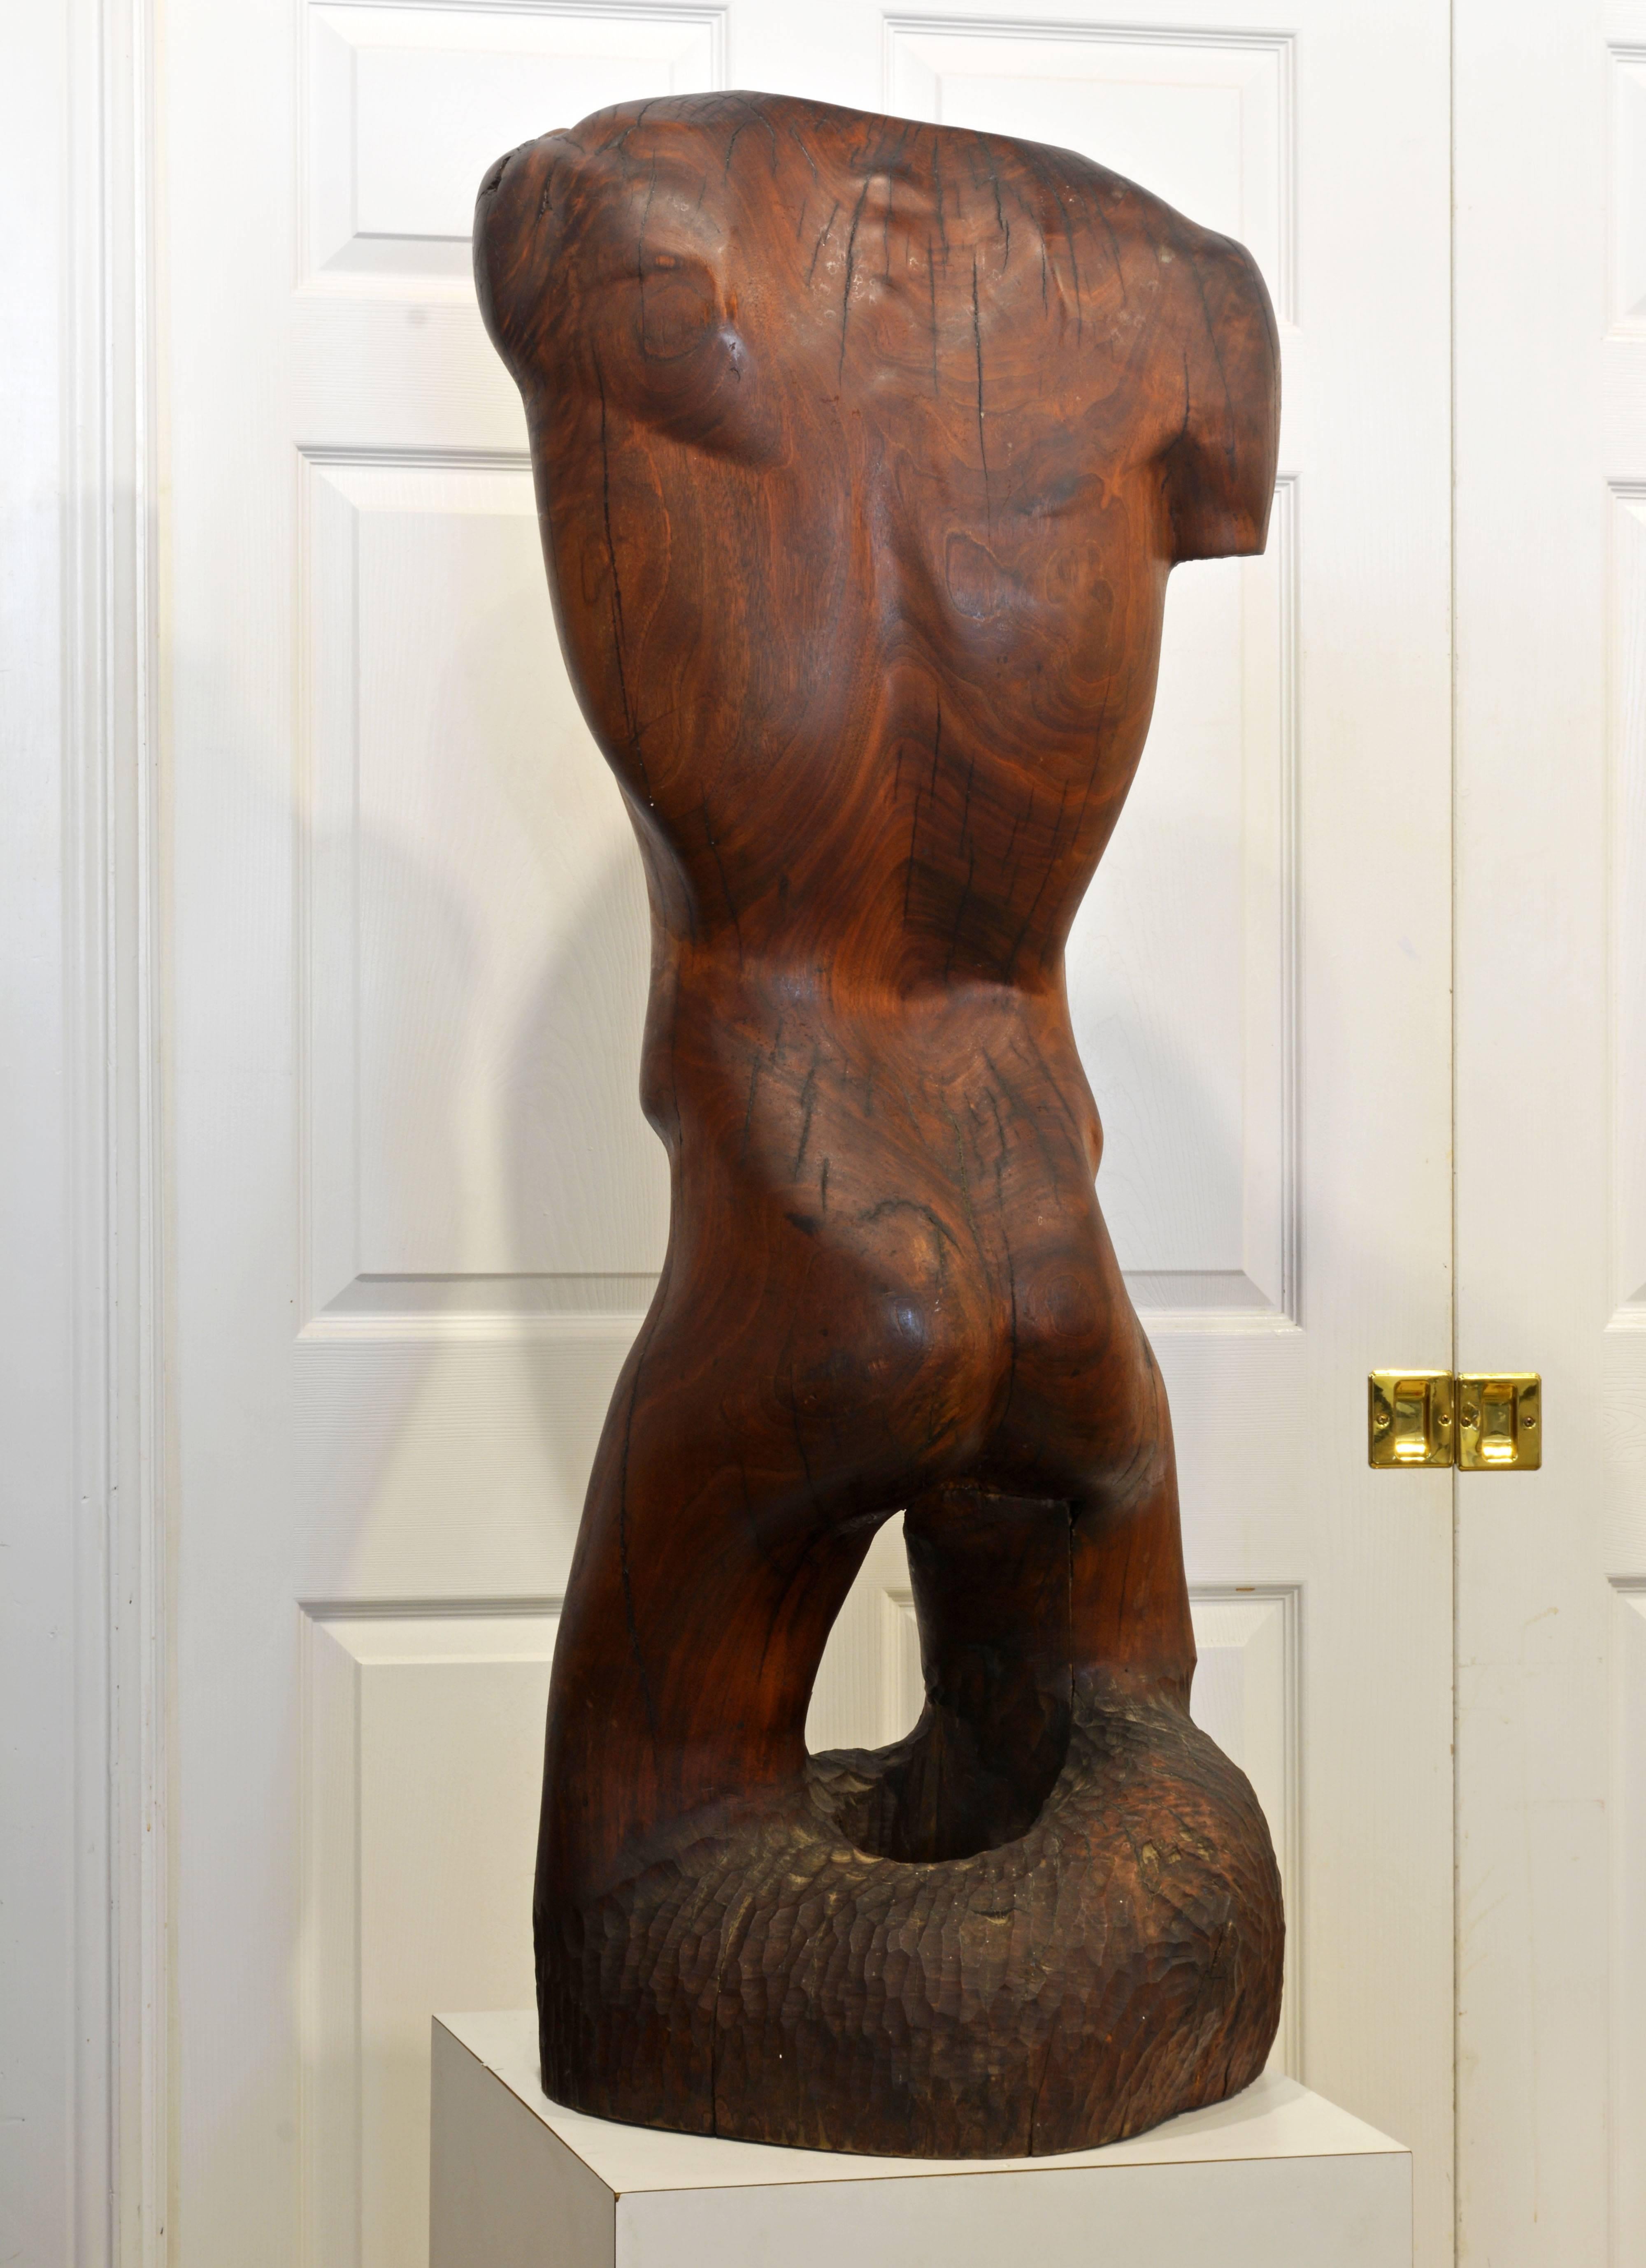 American Expressive Lifesize Hardwood Statue of Male Nude by Dennis Penessa